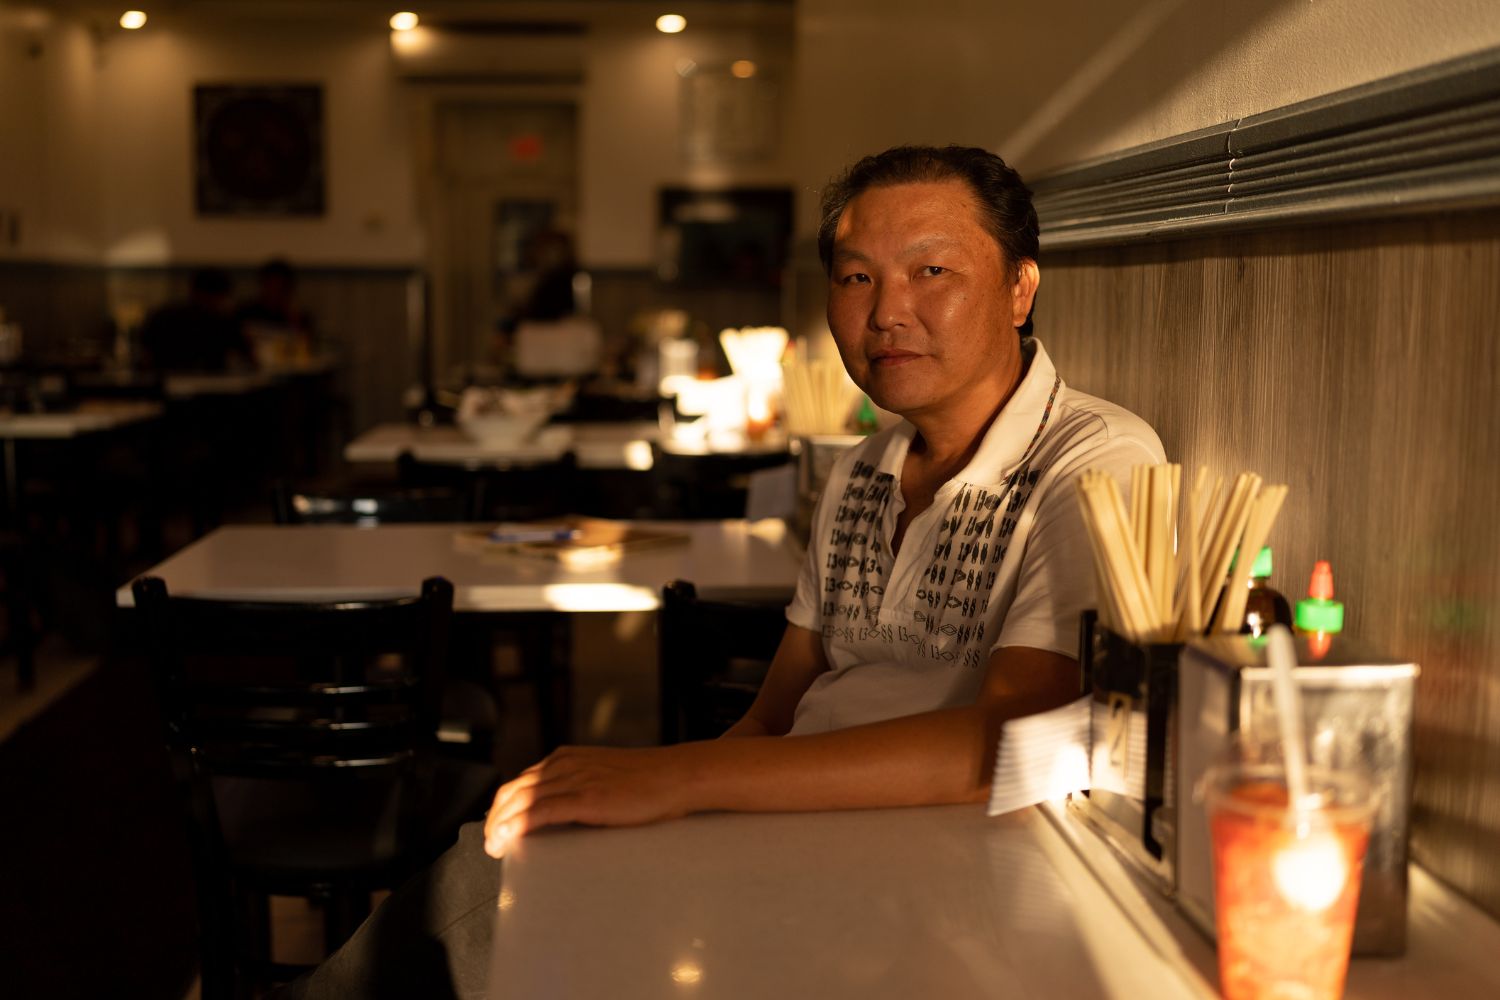 Quan opened his restaurant in 2008 with his wife, Ngan, and his been serving the community ever since. 